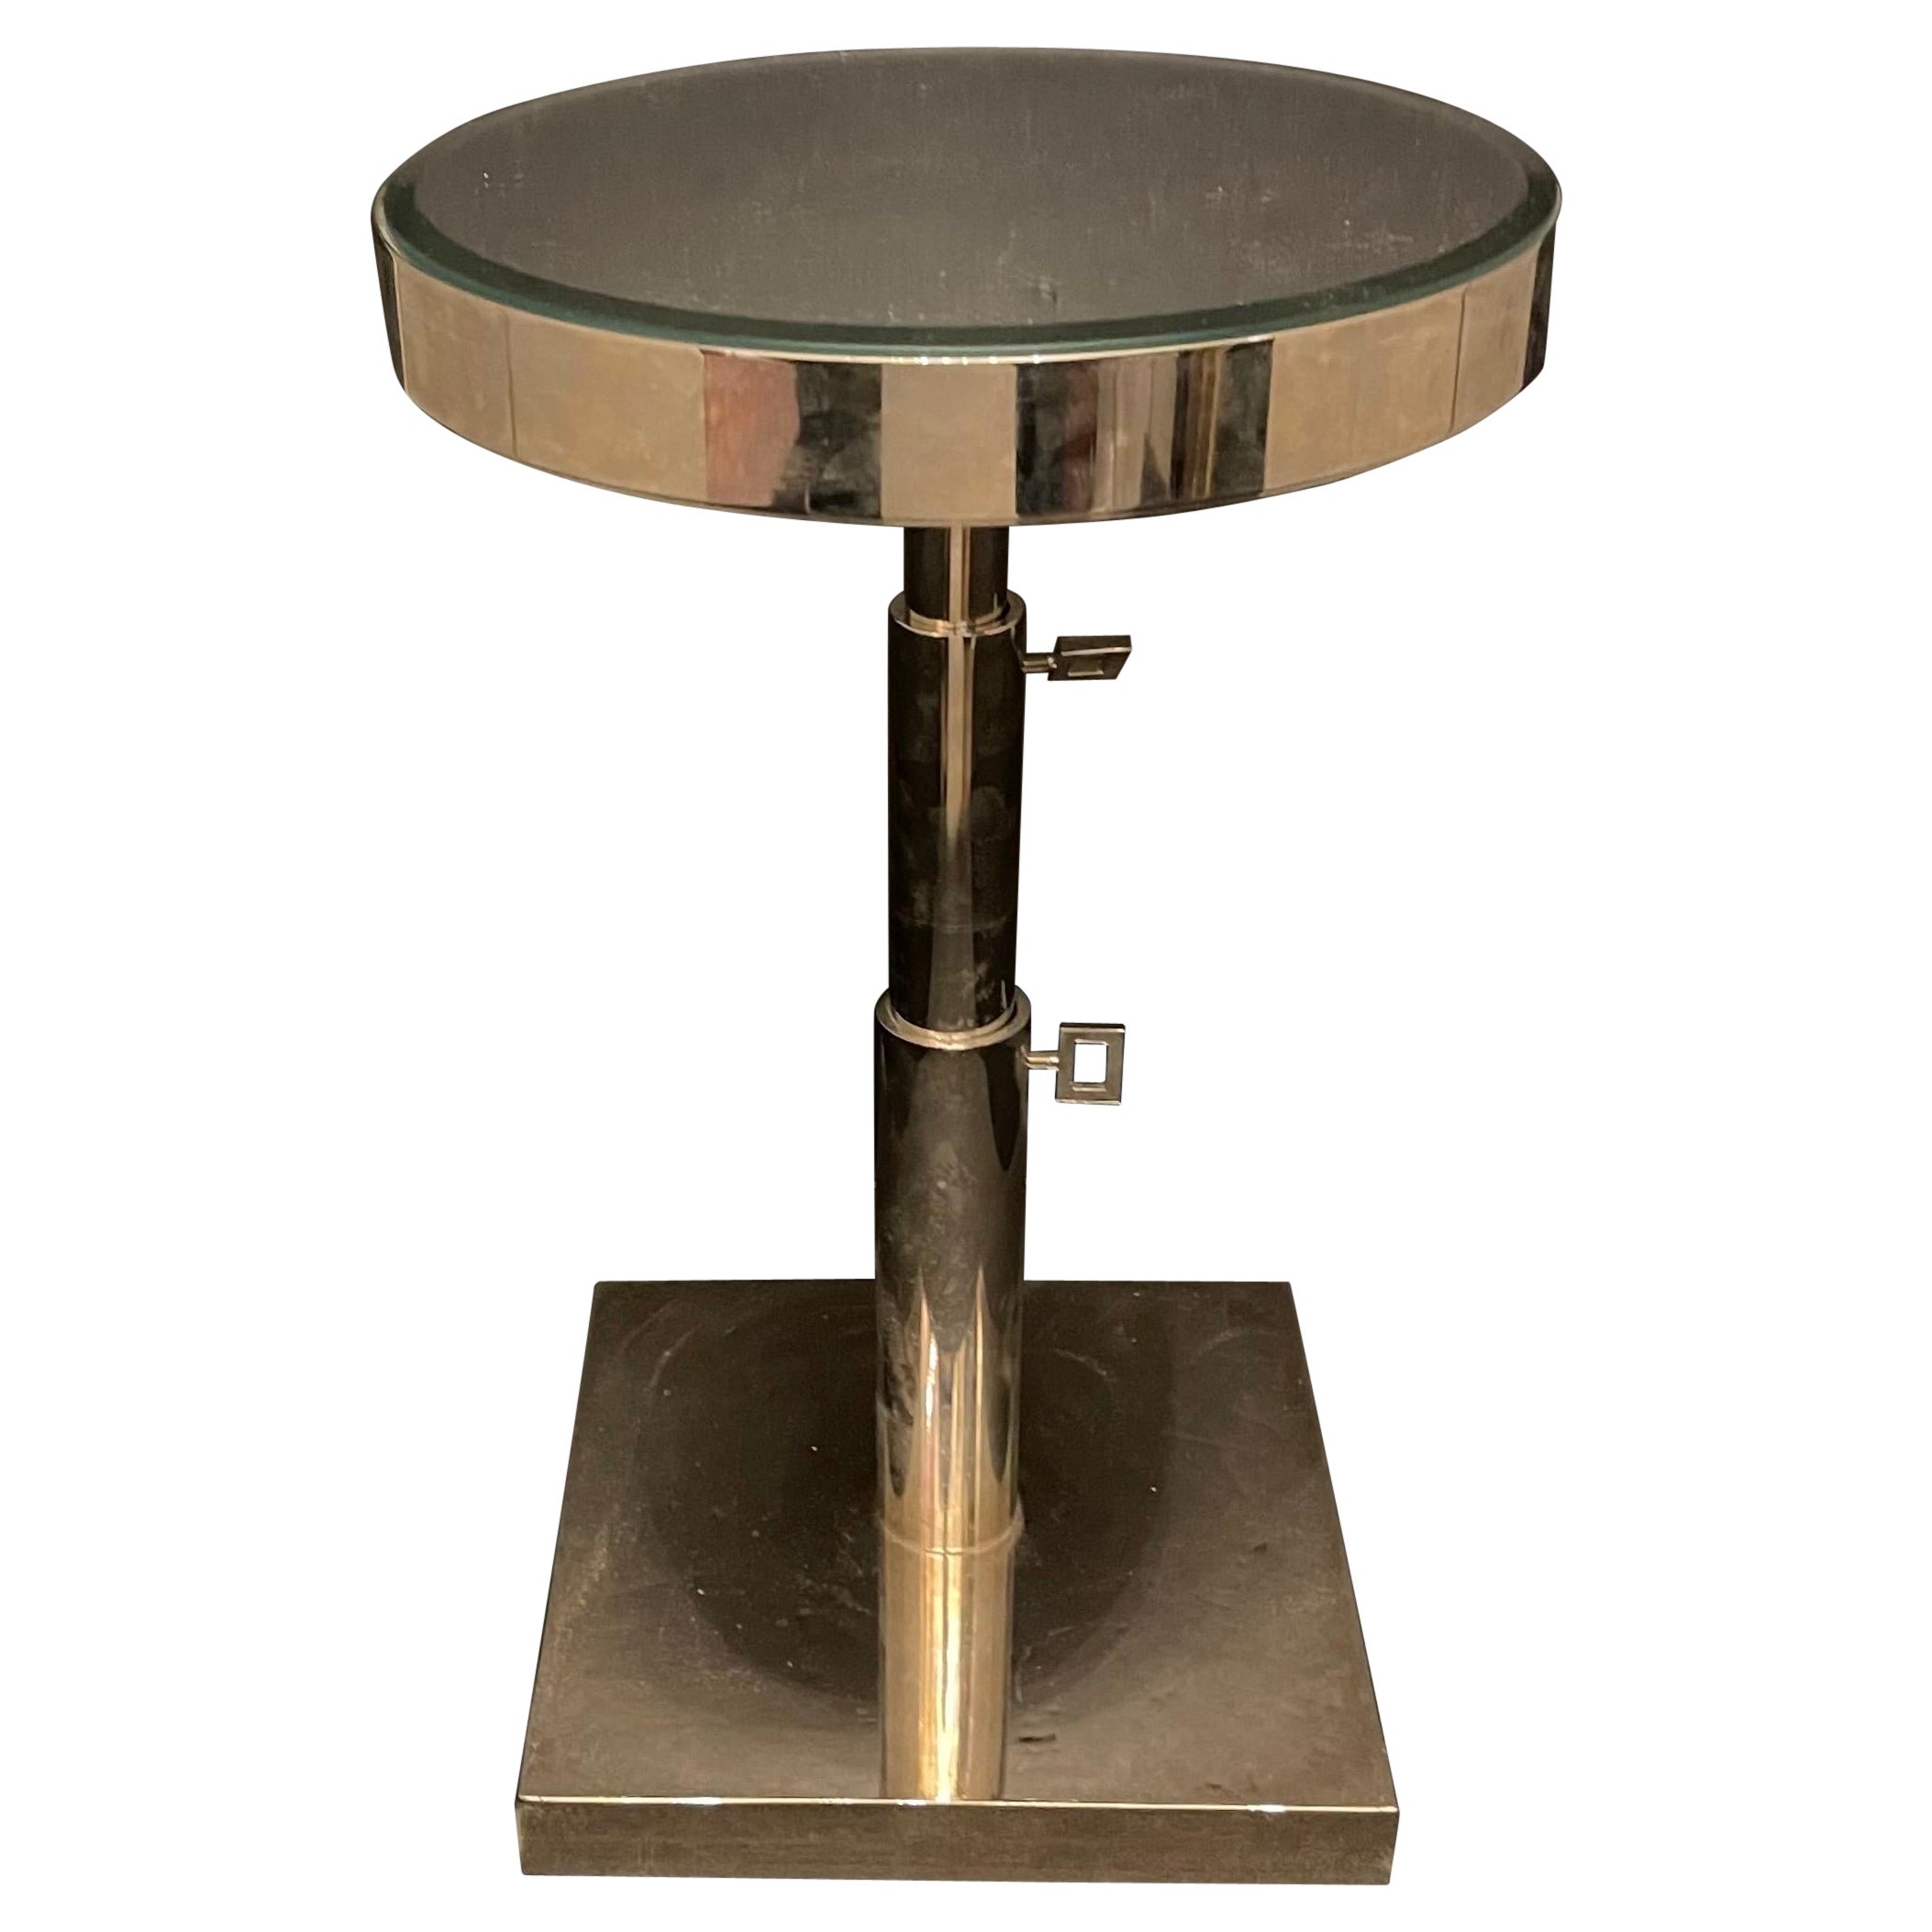 Wonderful Lorin Marsh Polished Nickel Round Mirrored Top Telescoping Side Table For Sale